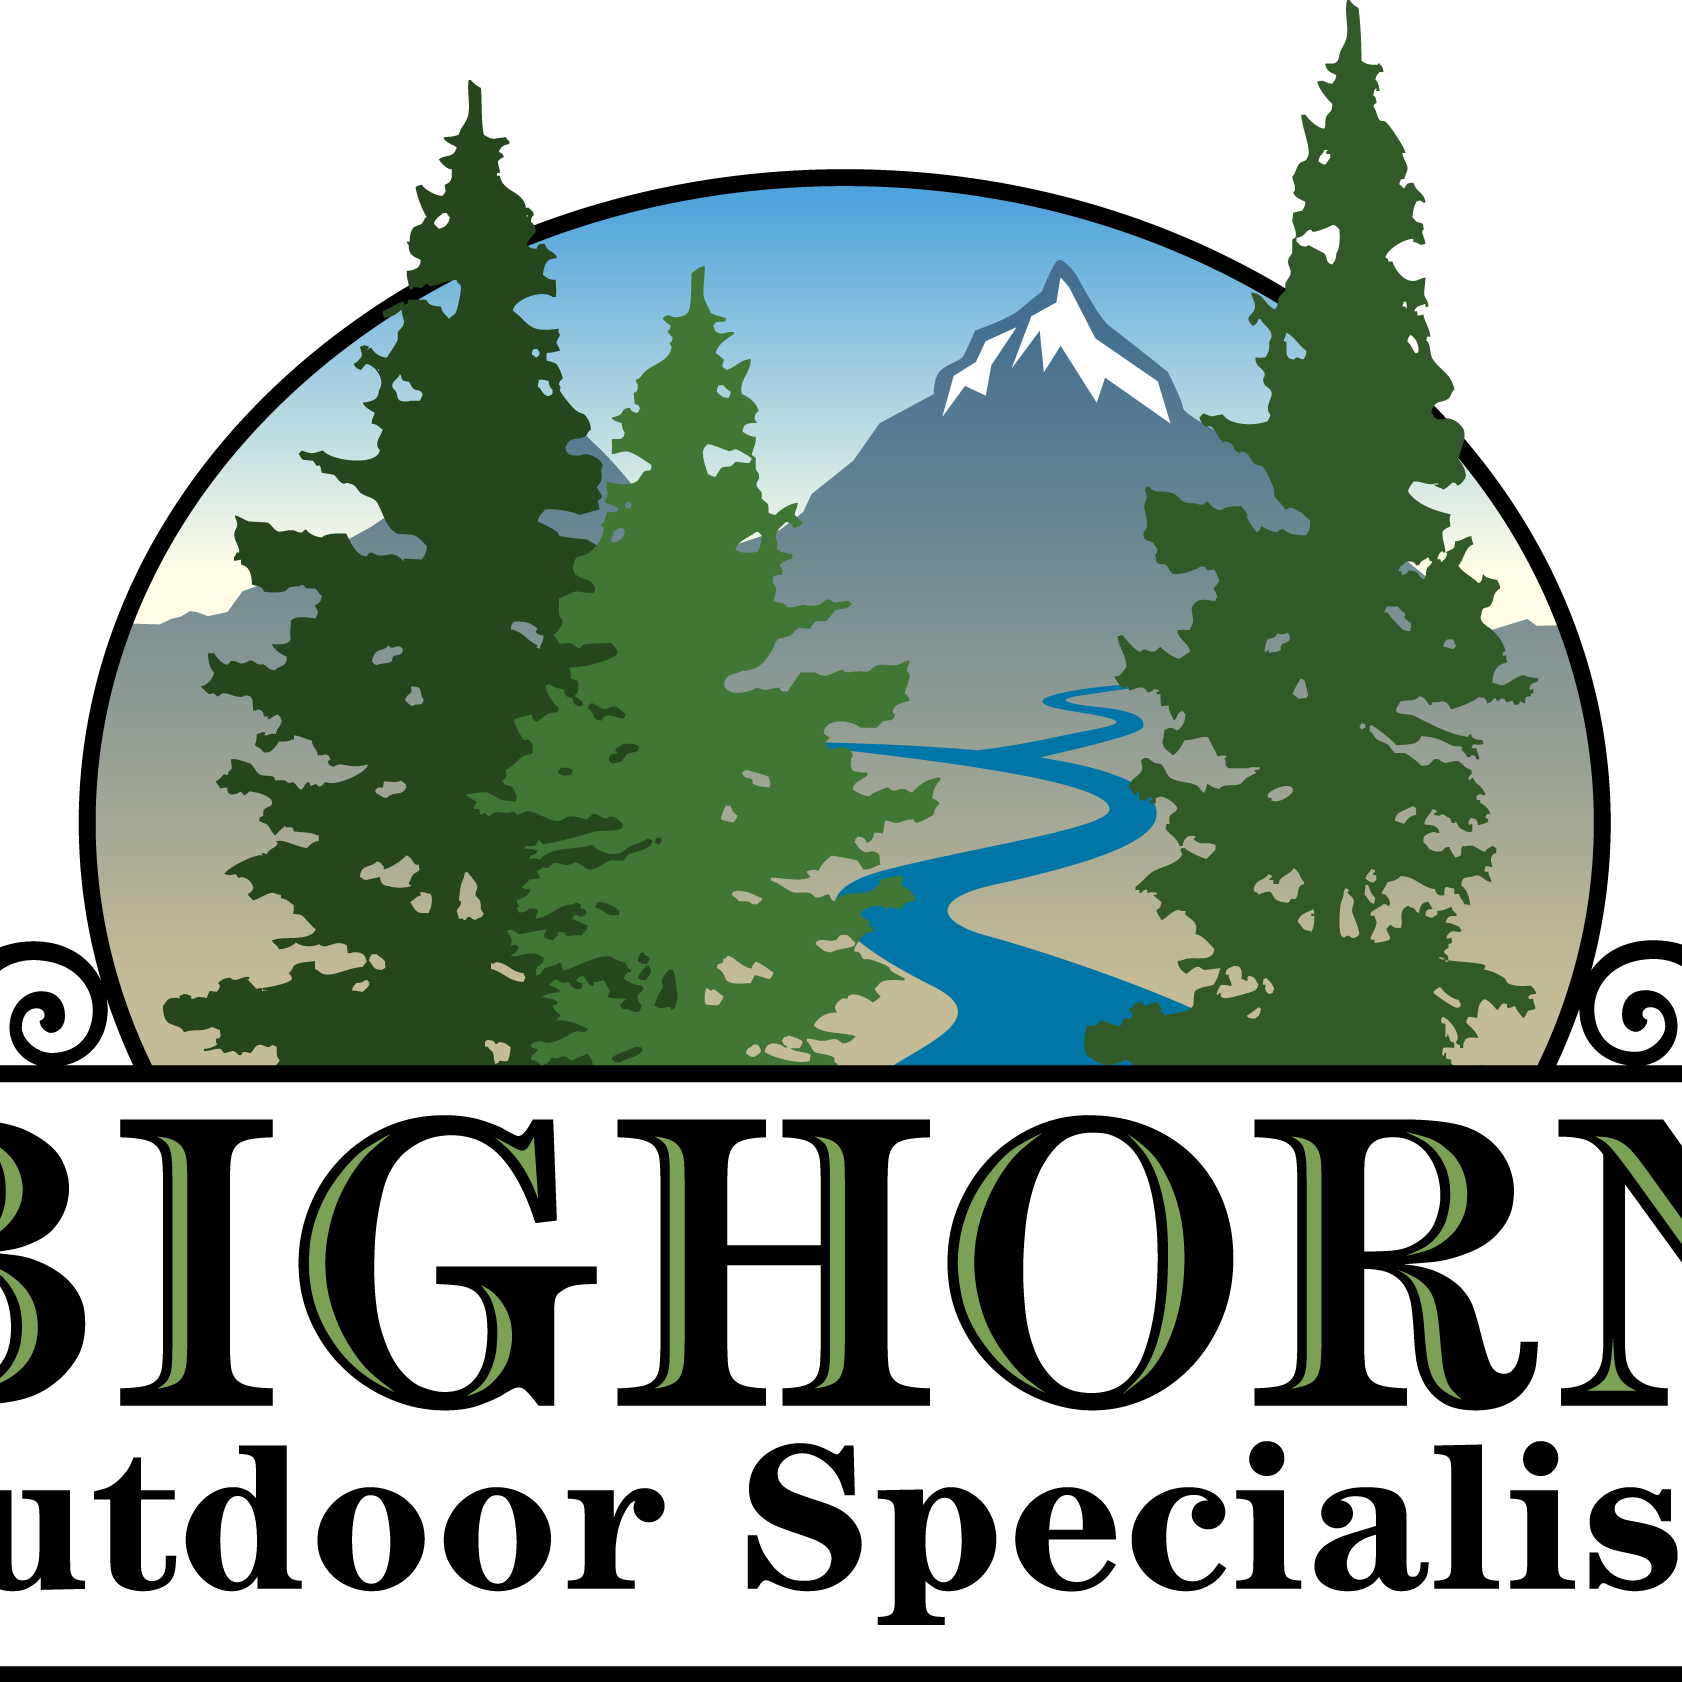 Clothing, footwear & equipment for outdoor adventure. Locally & Independently Owned Since 1978 #YouShouldBeOutside #BighornWild 406-453-2841